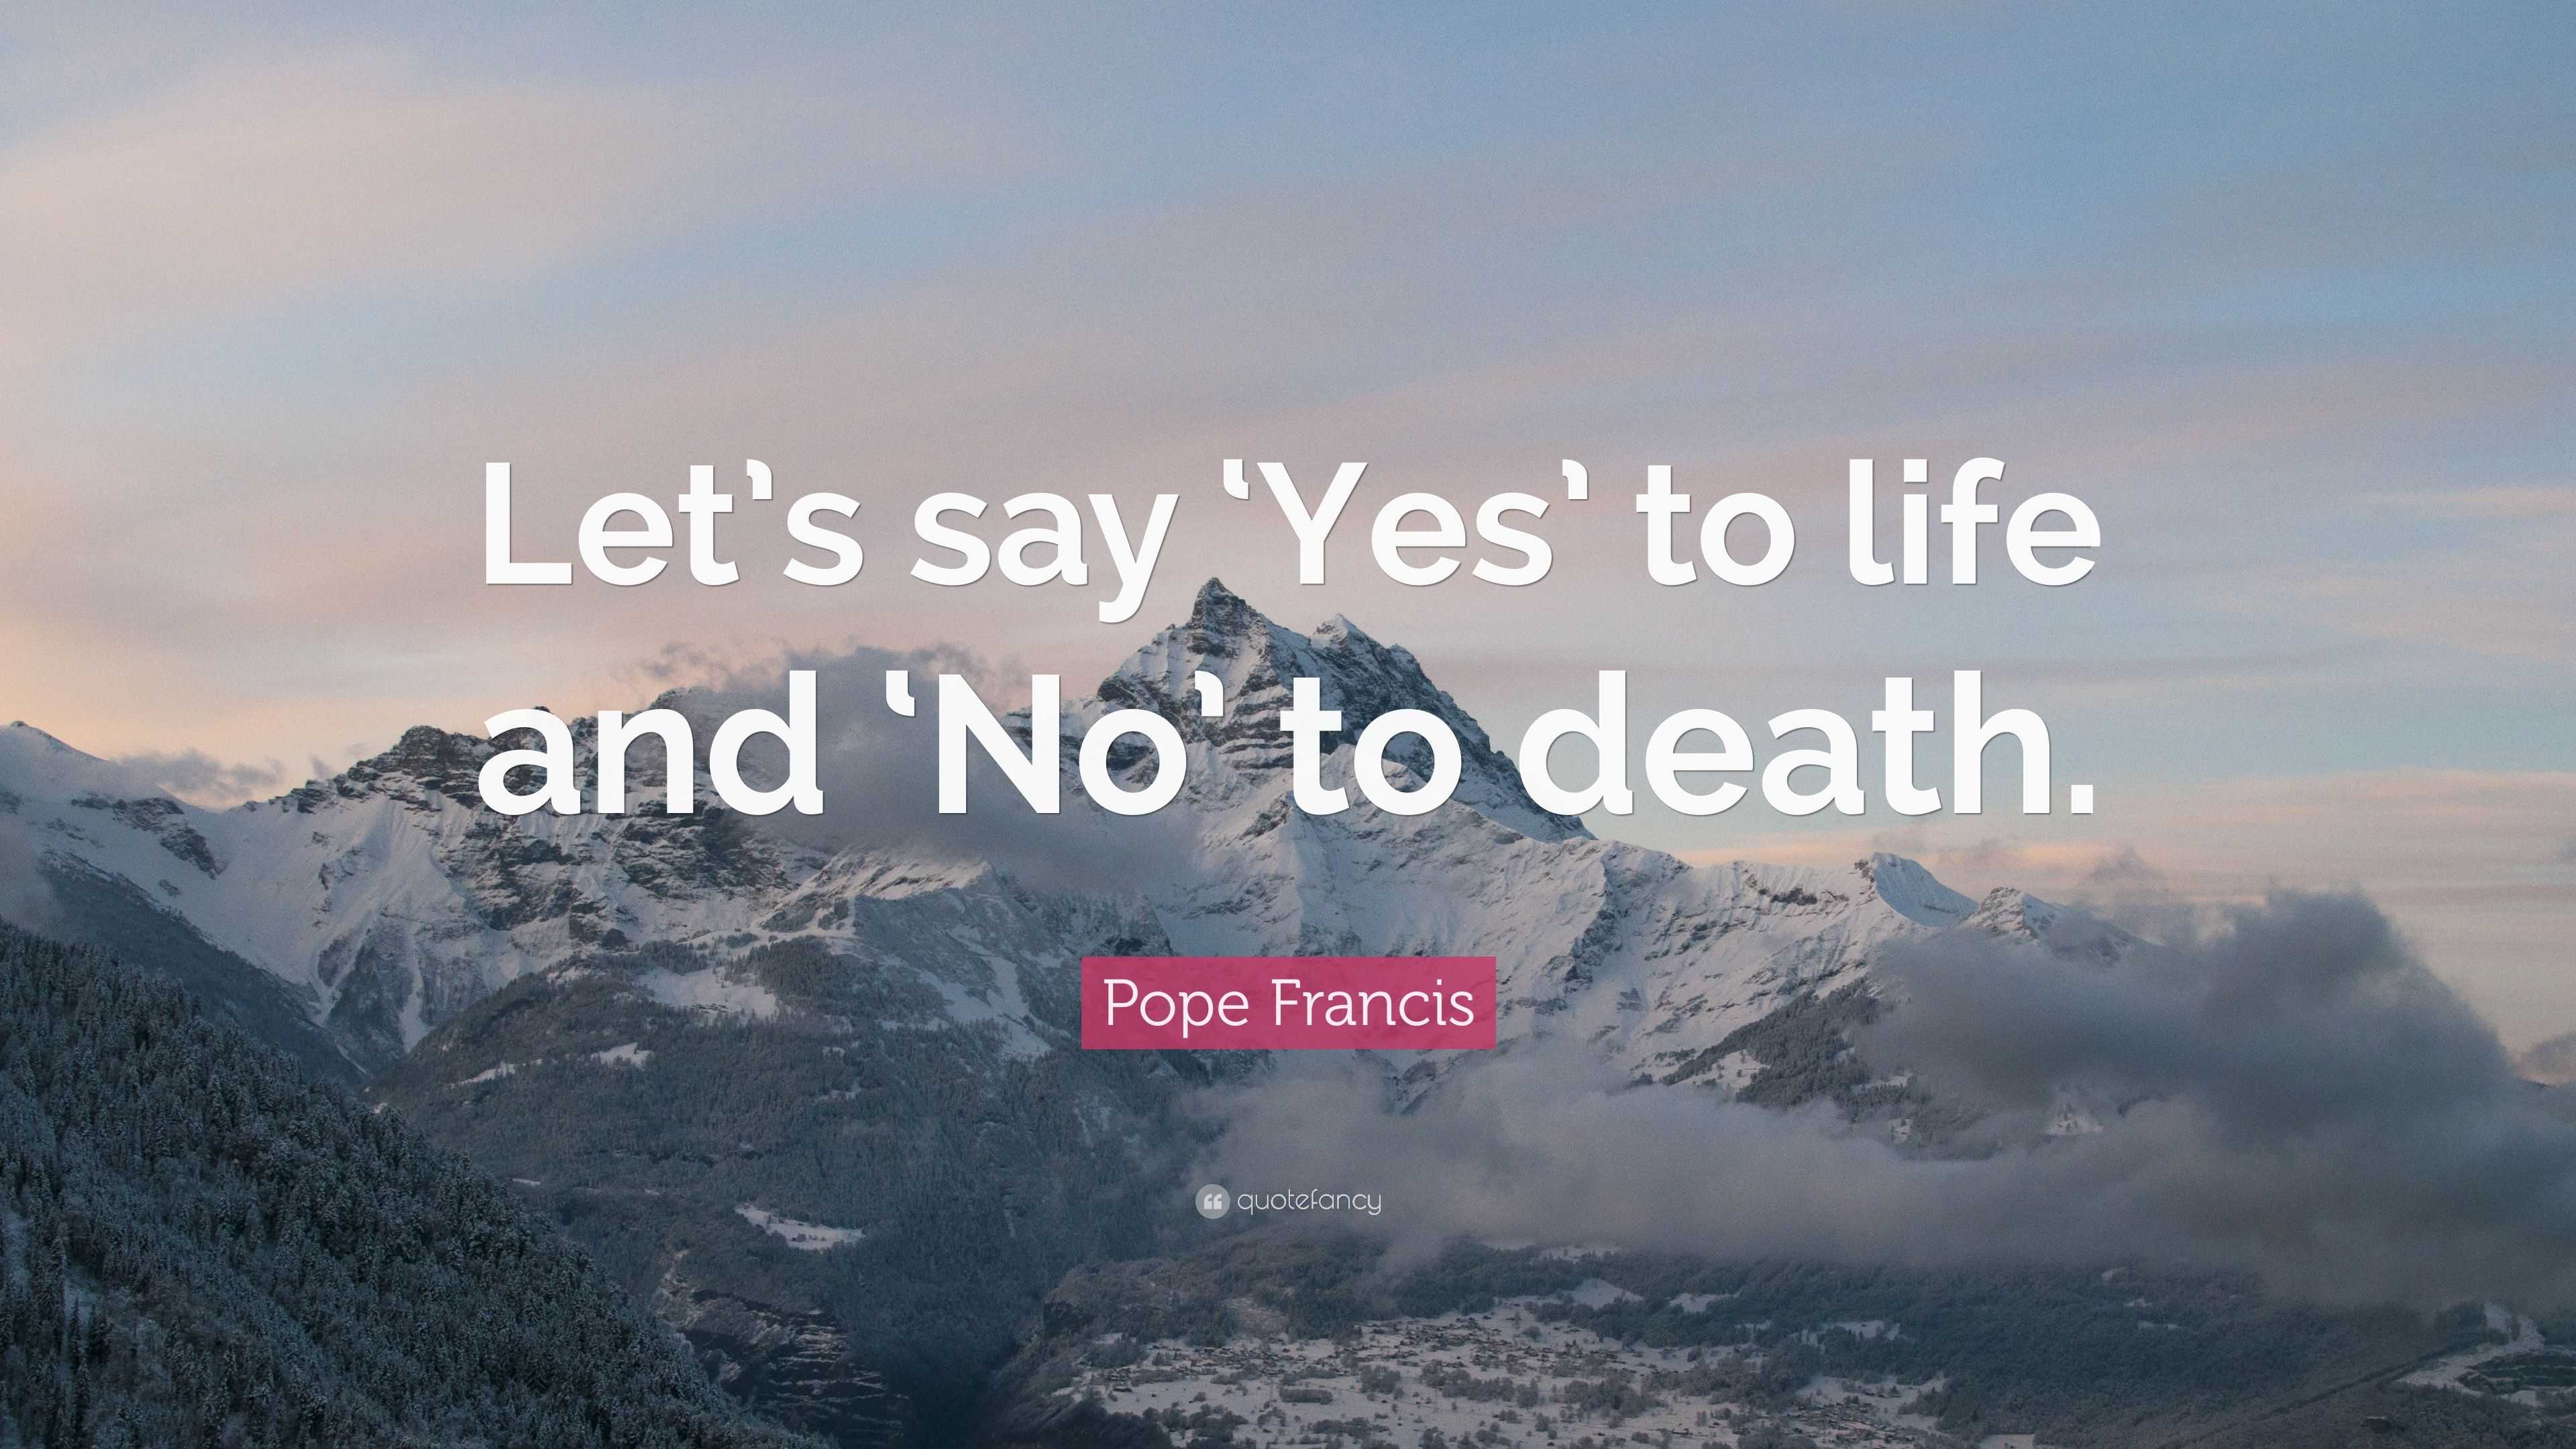 Pope Francis Quote: “Let’s say ‘Yes’ to life and ‘No’ to death.”